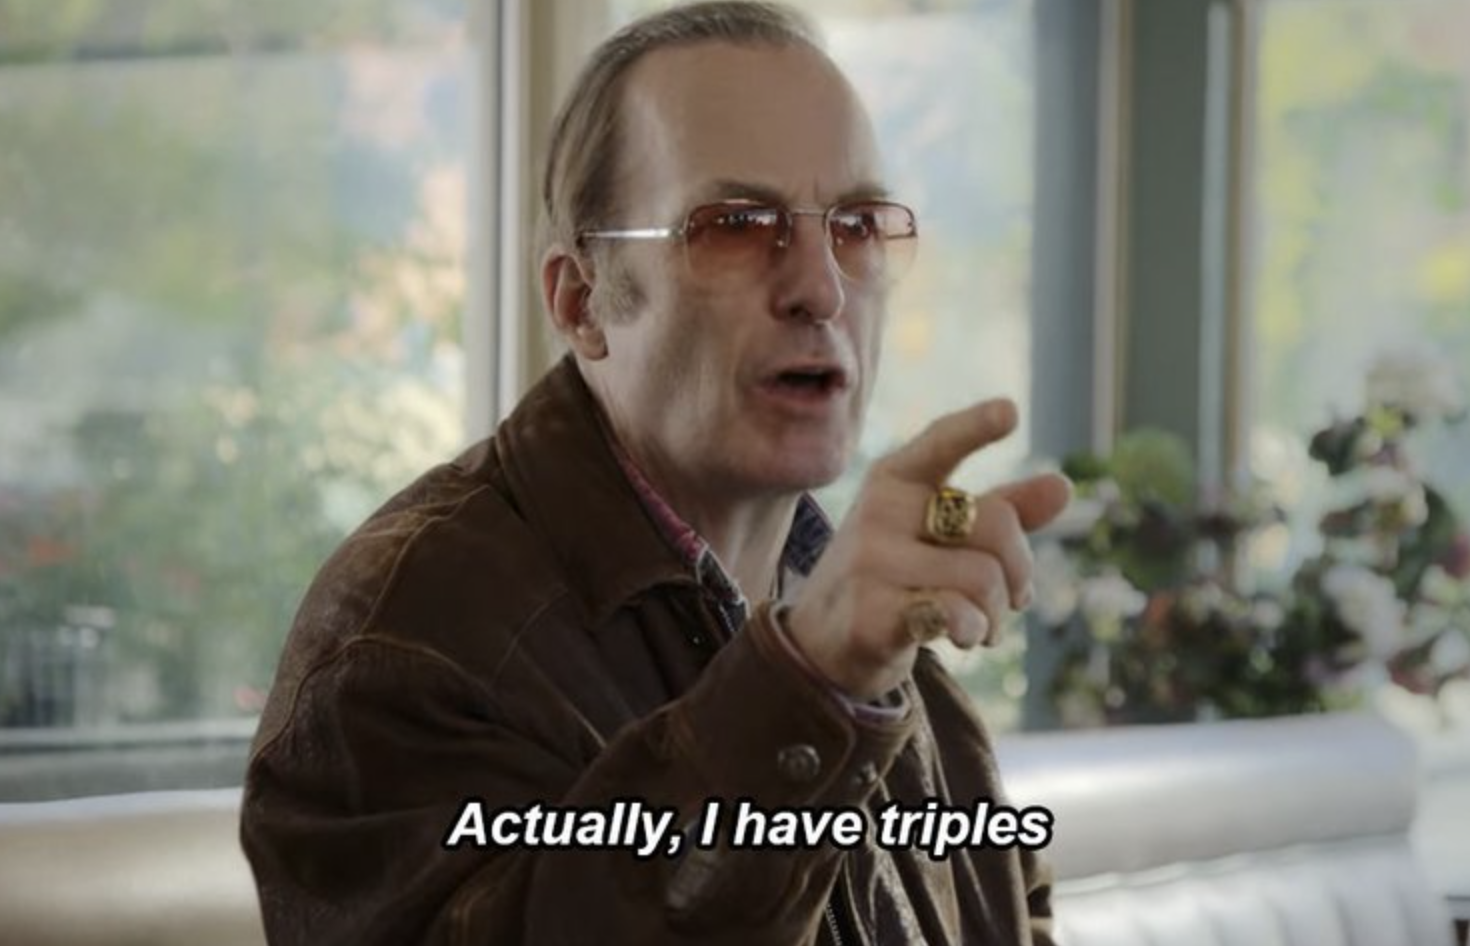 bob odenkirk wears transition sunglasses and a corduroy jacket. he points and says &quot;actually, i have triples&quot;